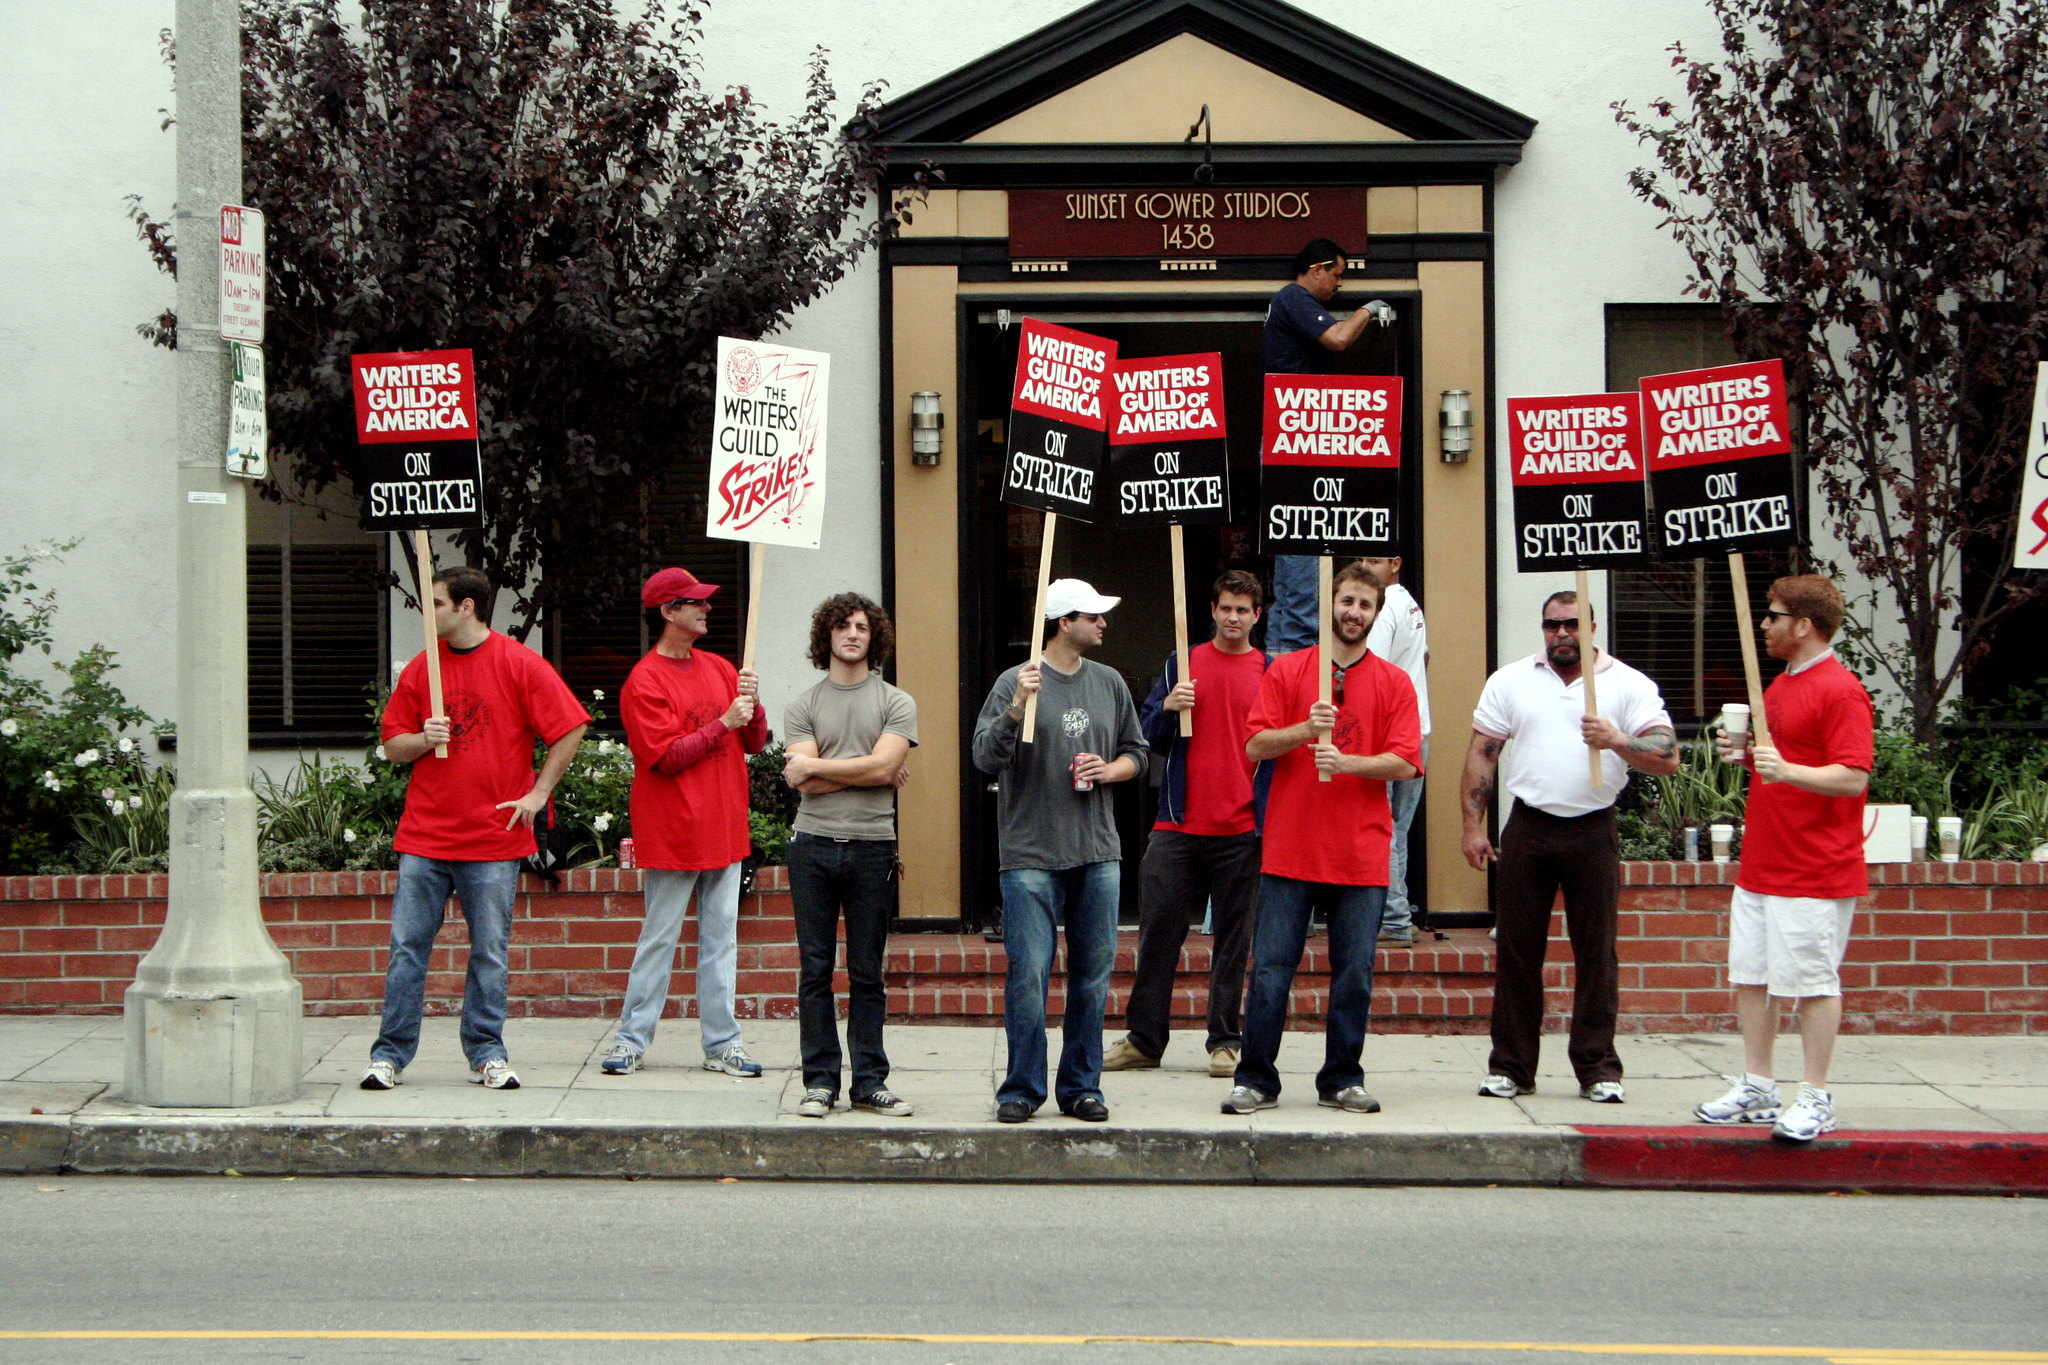 Writers strike picketers outside of the Sunset Gower Studio in Hollywood, CA. (Christy Macintosh/Flickr/Creative Commons)